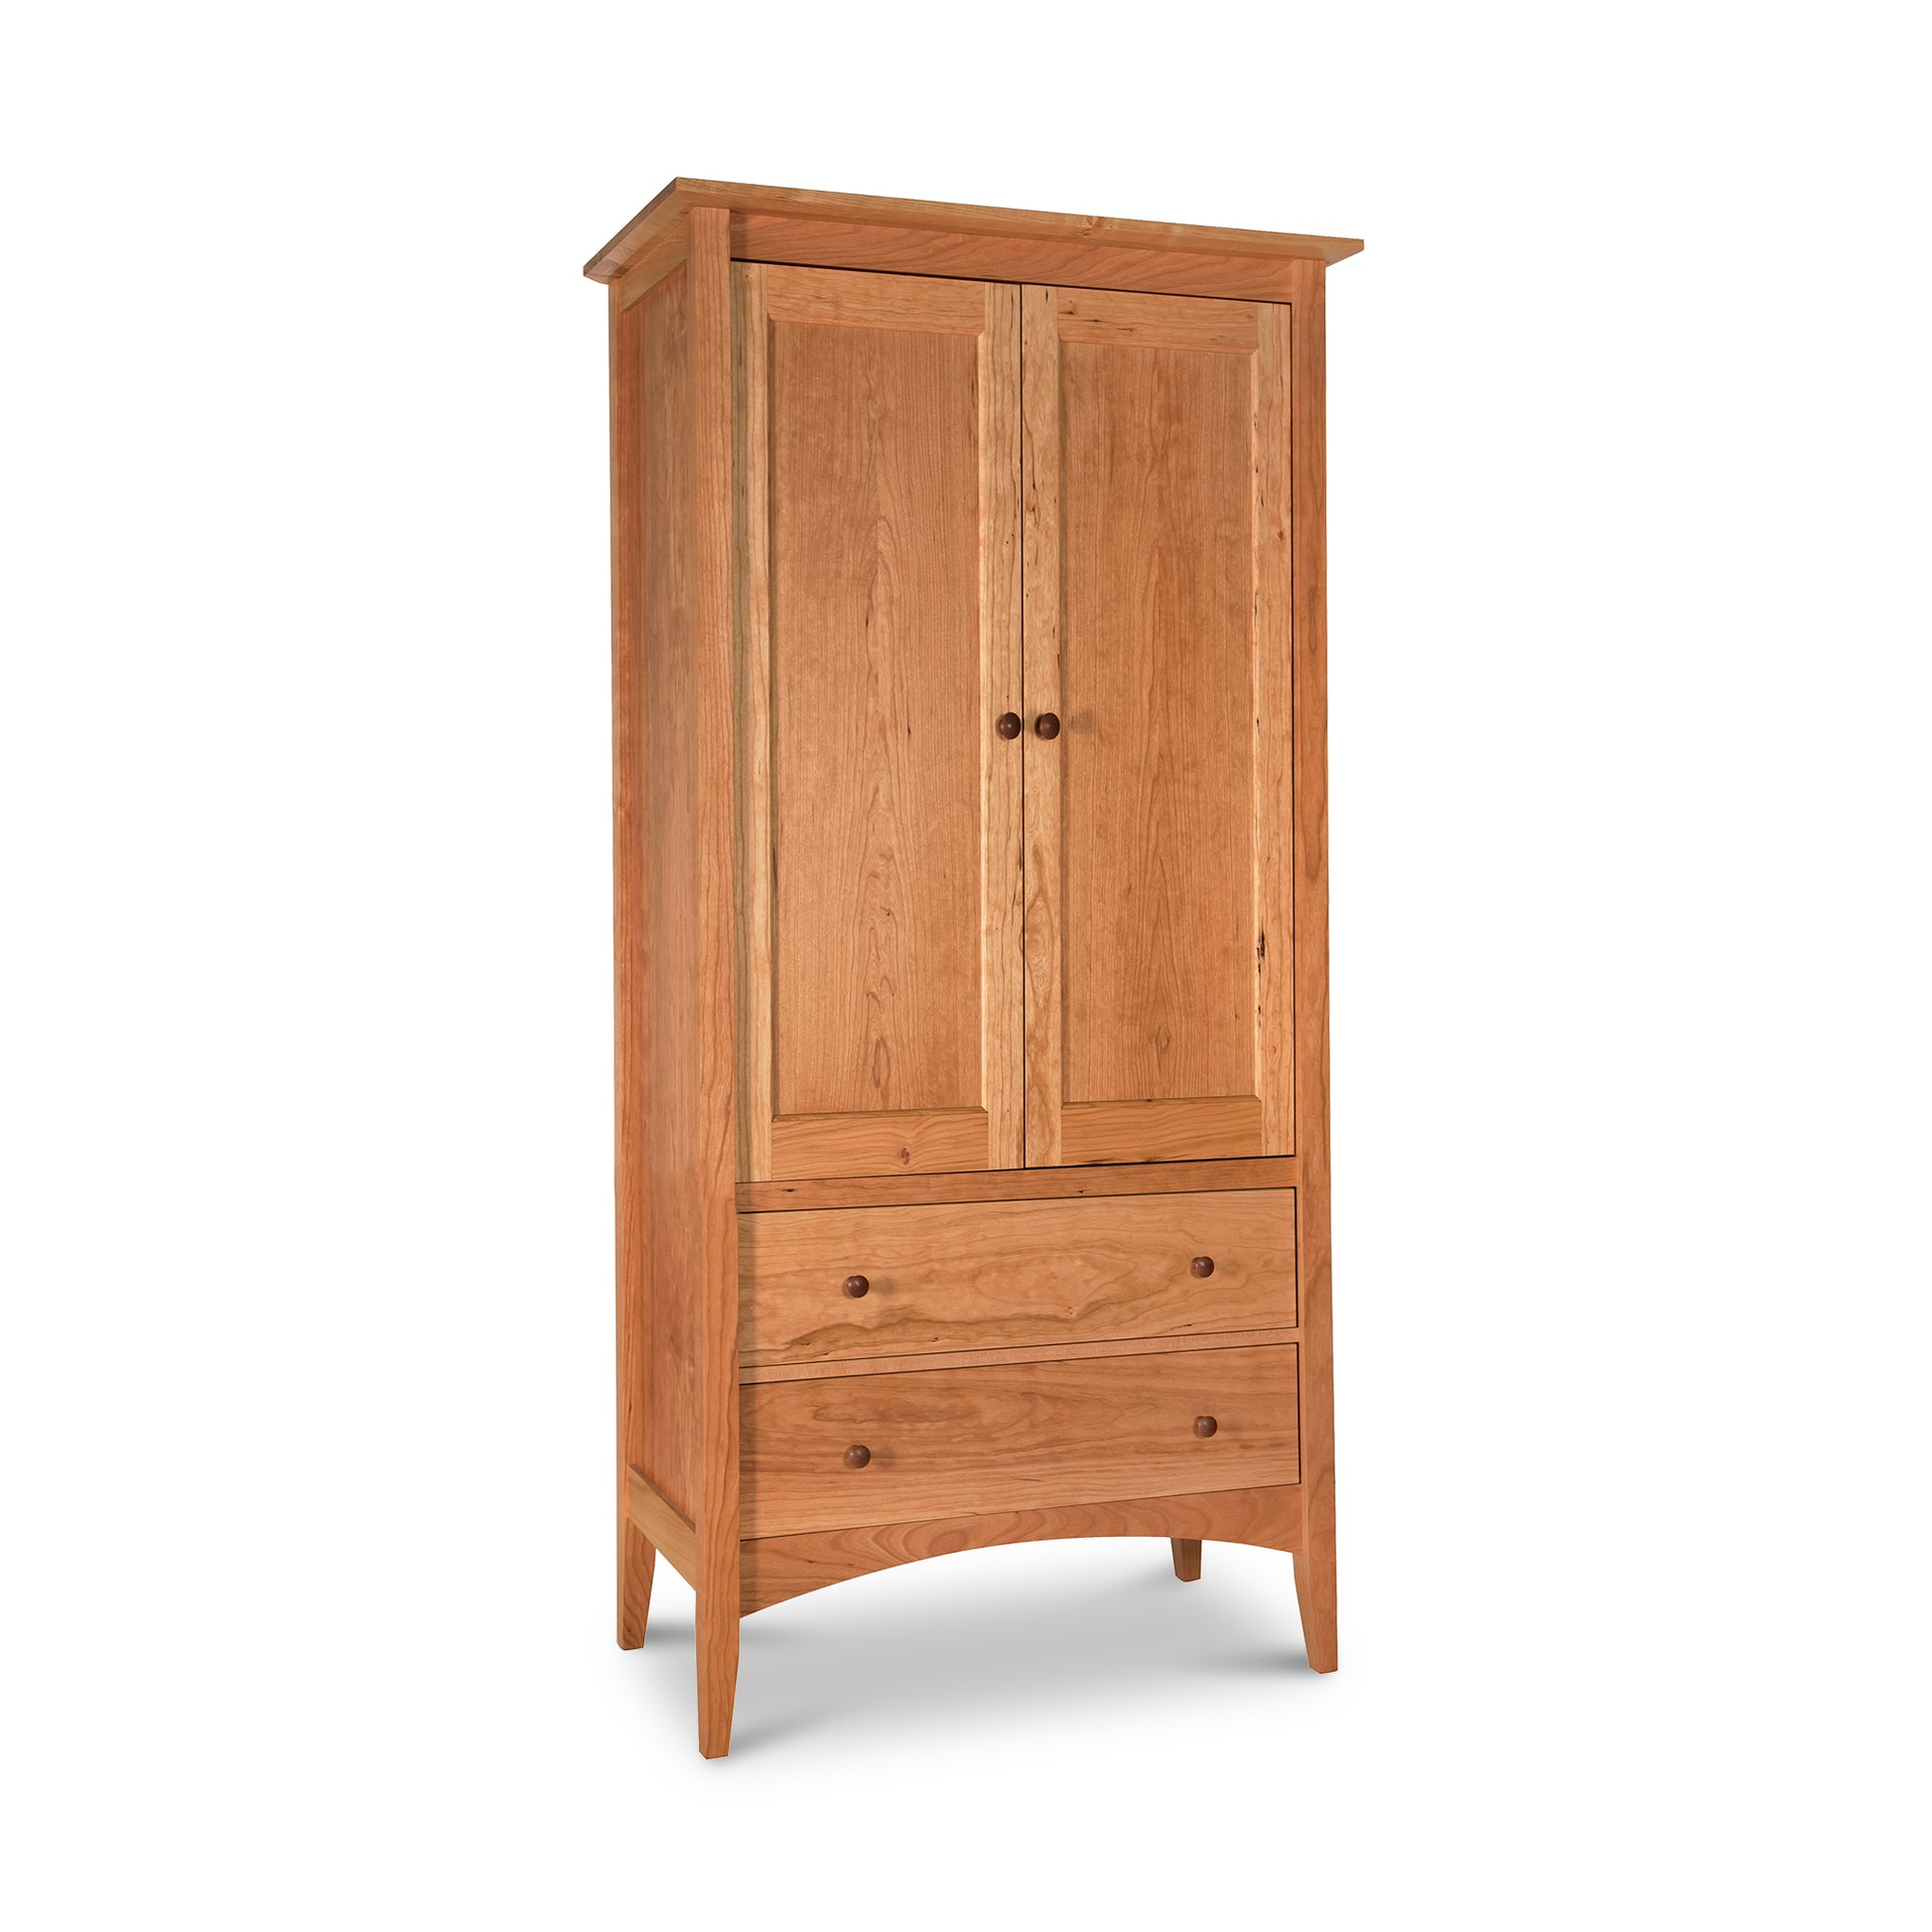 Maple Corner Woodworks American Shaker Armoire: Solid wood wardrobe with two doors and a lower drawer, isolated on a white background.